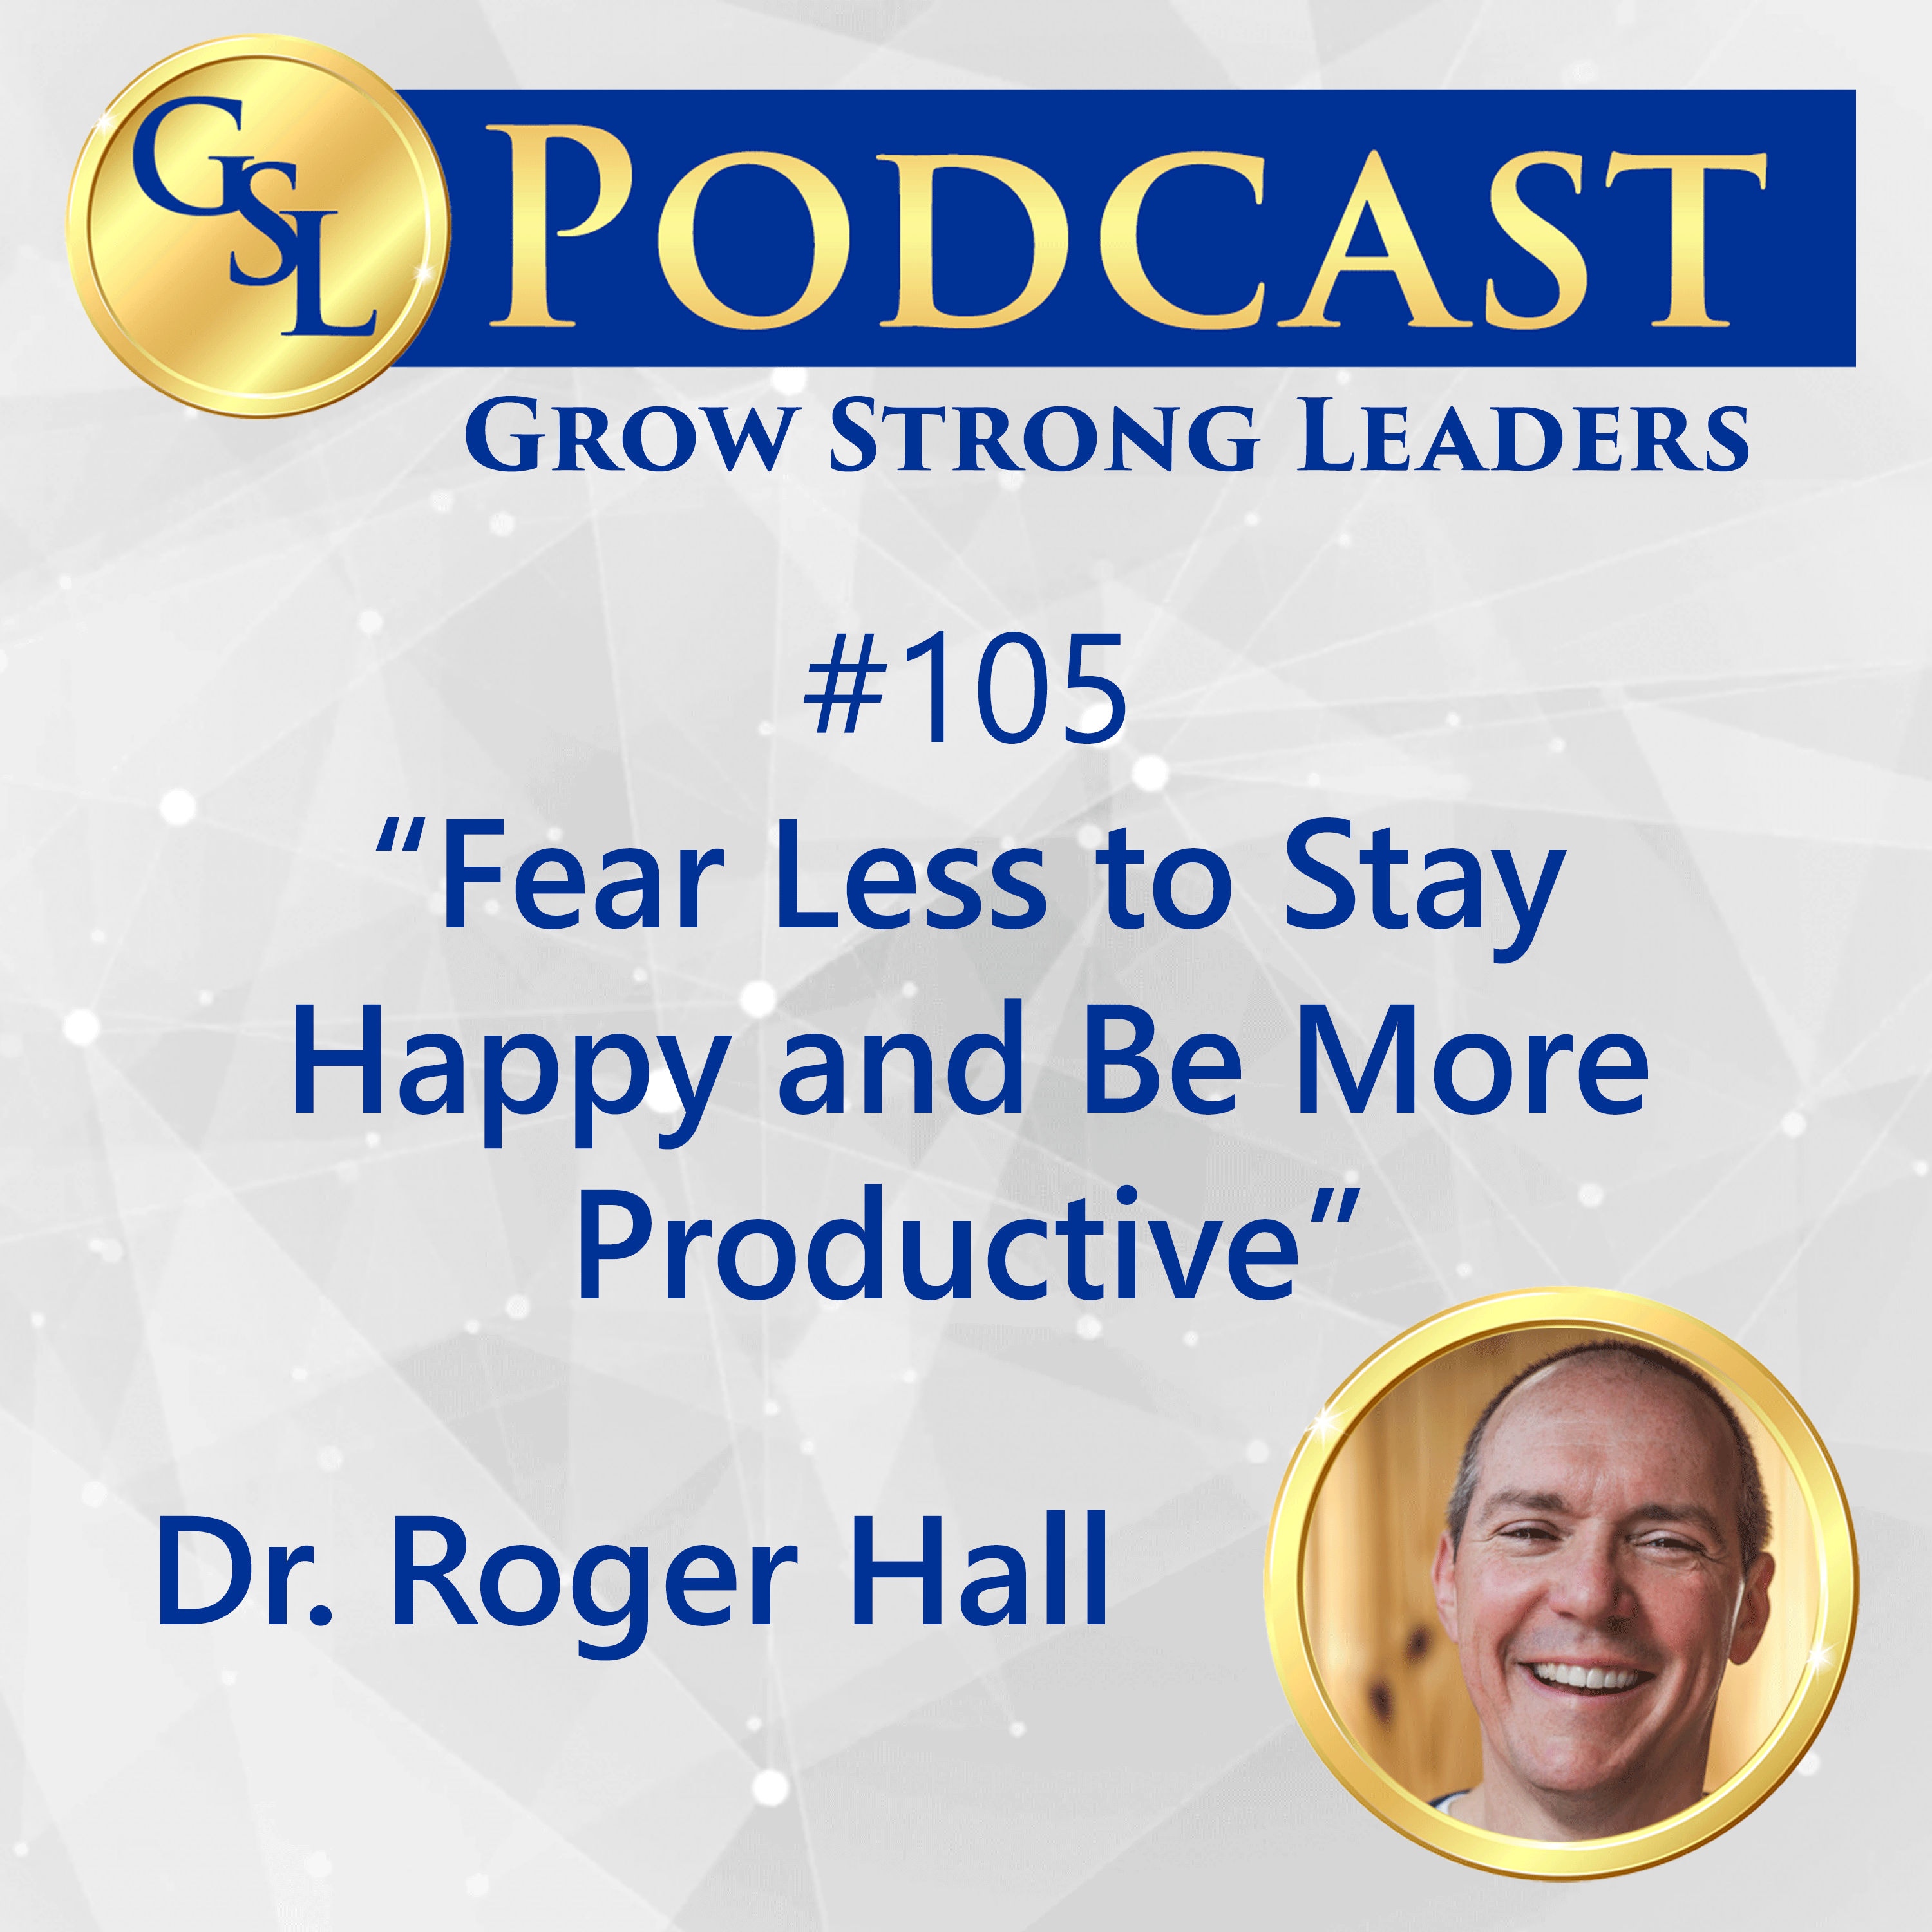 Podcast Layout - Dr Roger Hall